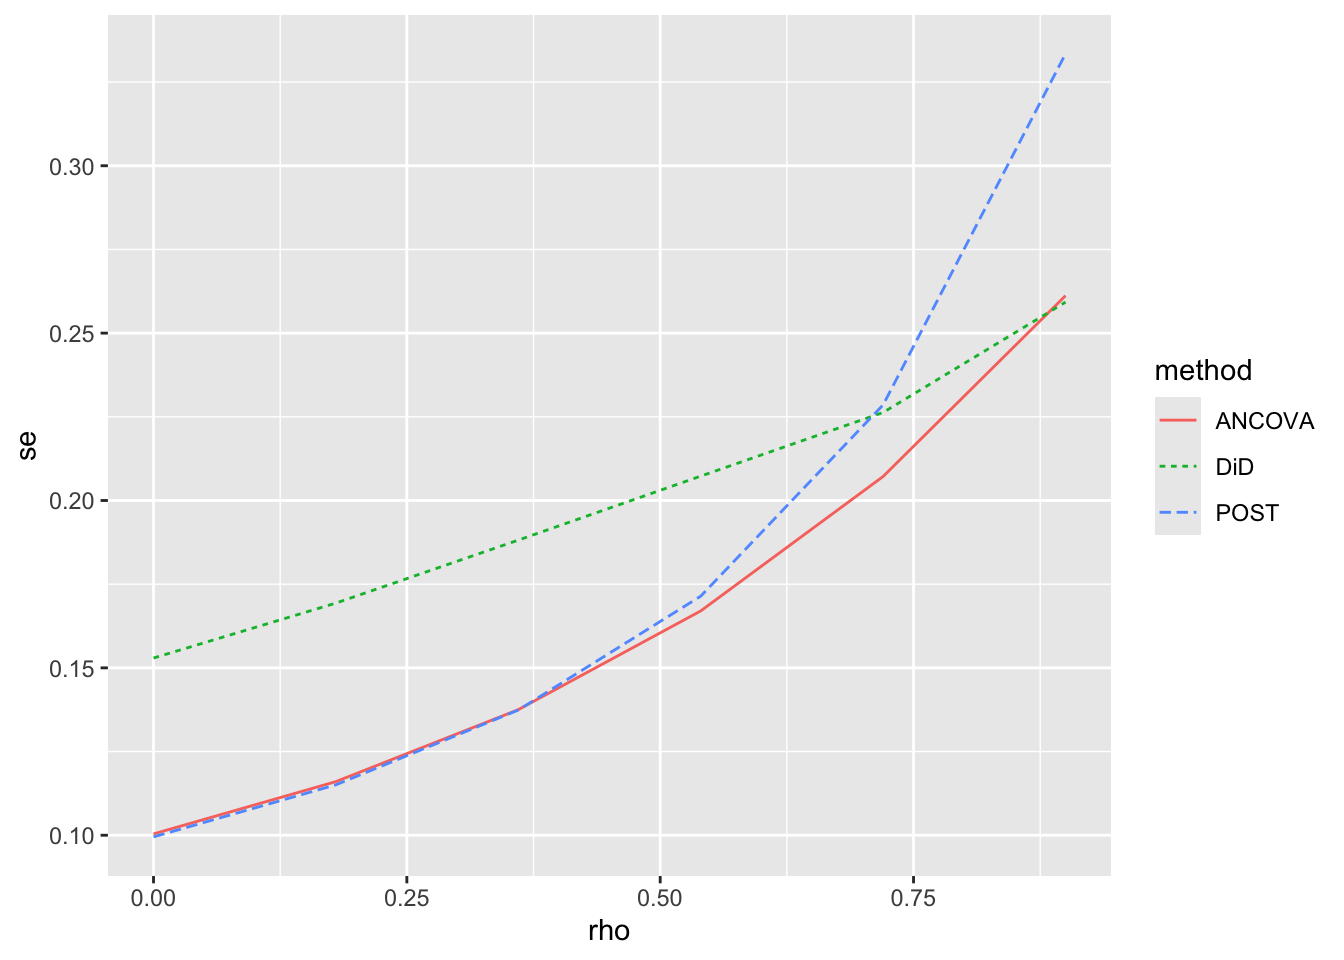 Standard errors as a function of rho parameter. For POST, standard errors start at around 0.10, but increase to over 0.30 as rho approaches 1. For DiD, standard errors start at around 0.15, but increase to over 0.25 as rho approaches 1. For ANCOVA, standard errors start at around 0.10 and increase to over 0.25 as rho approaches 1. Thus the plot suggests that ANCOVA generally dominates both POST and DiD.